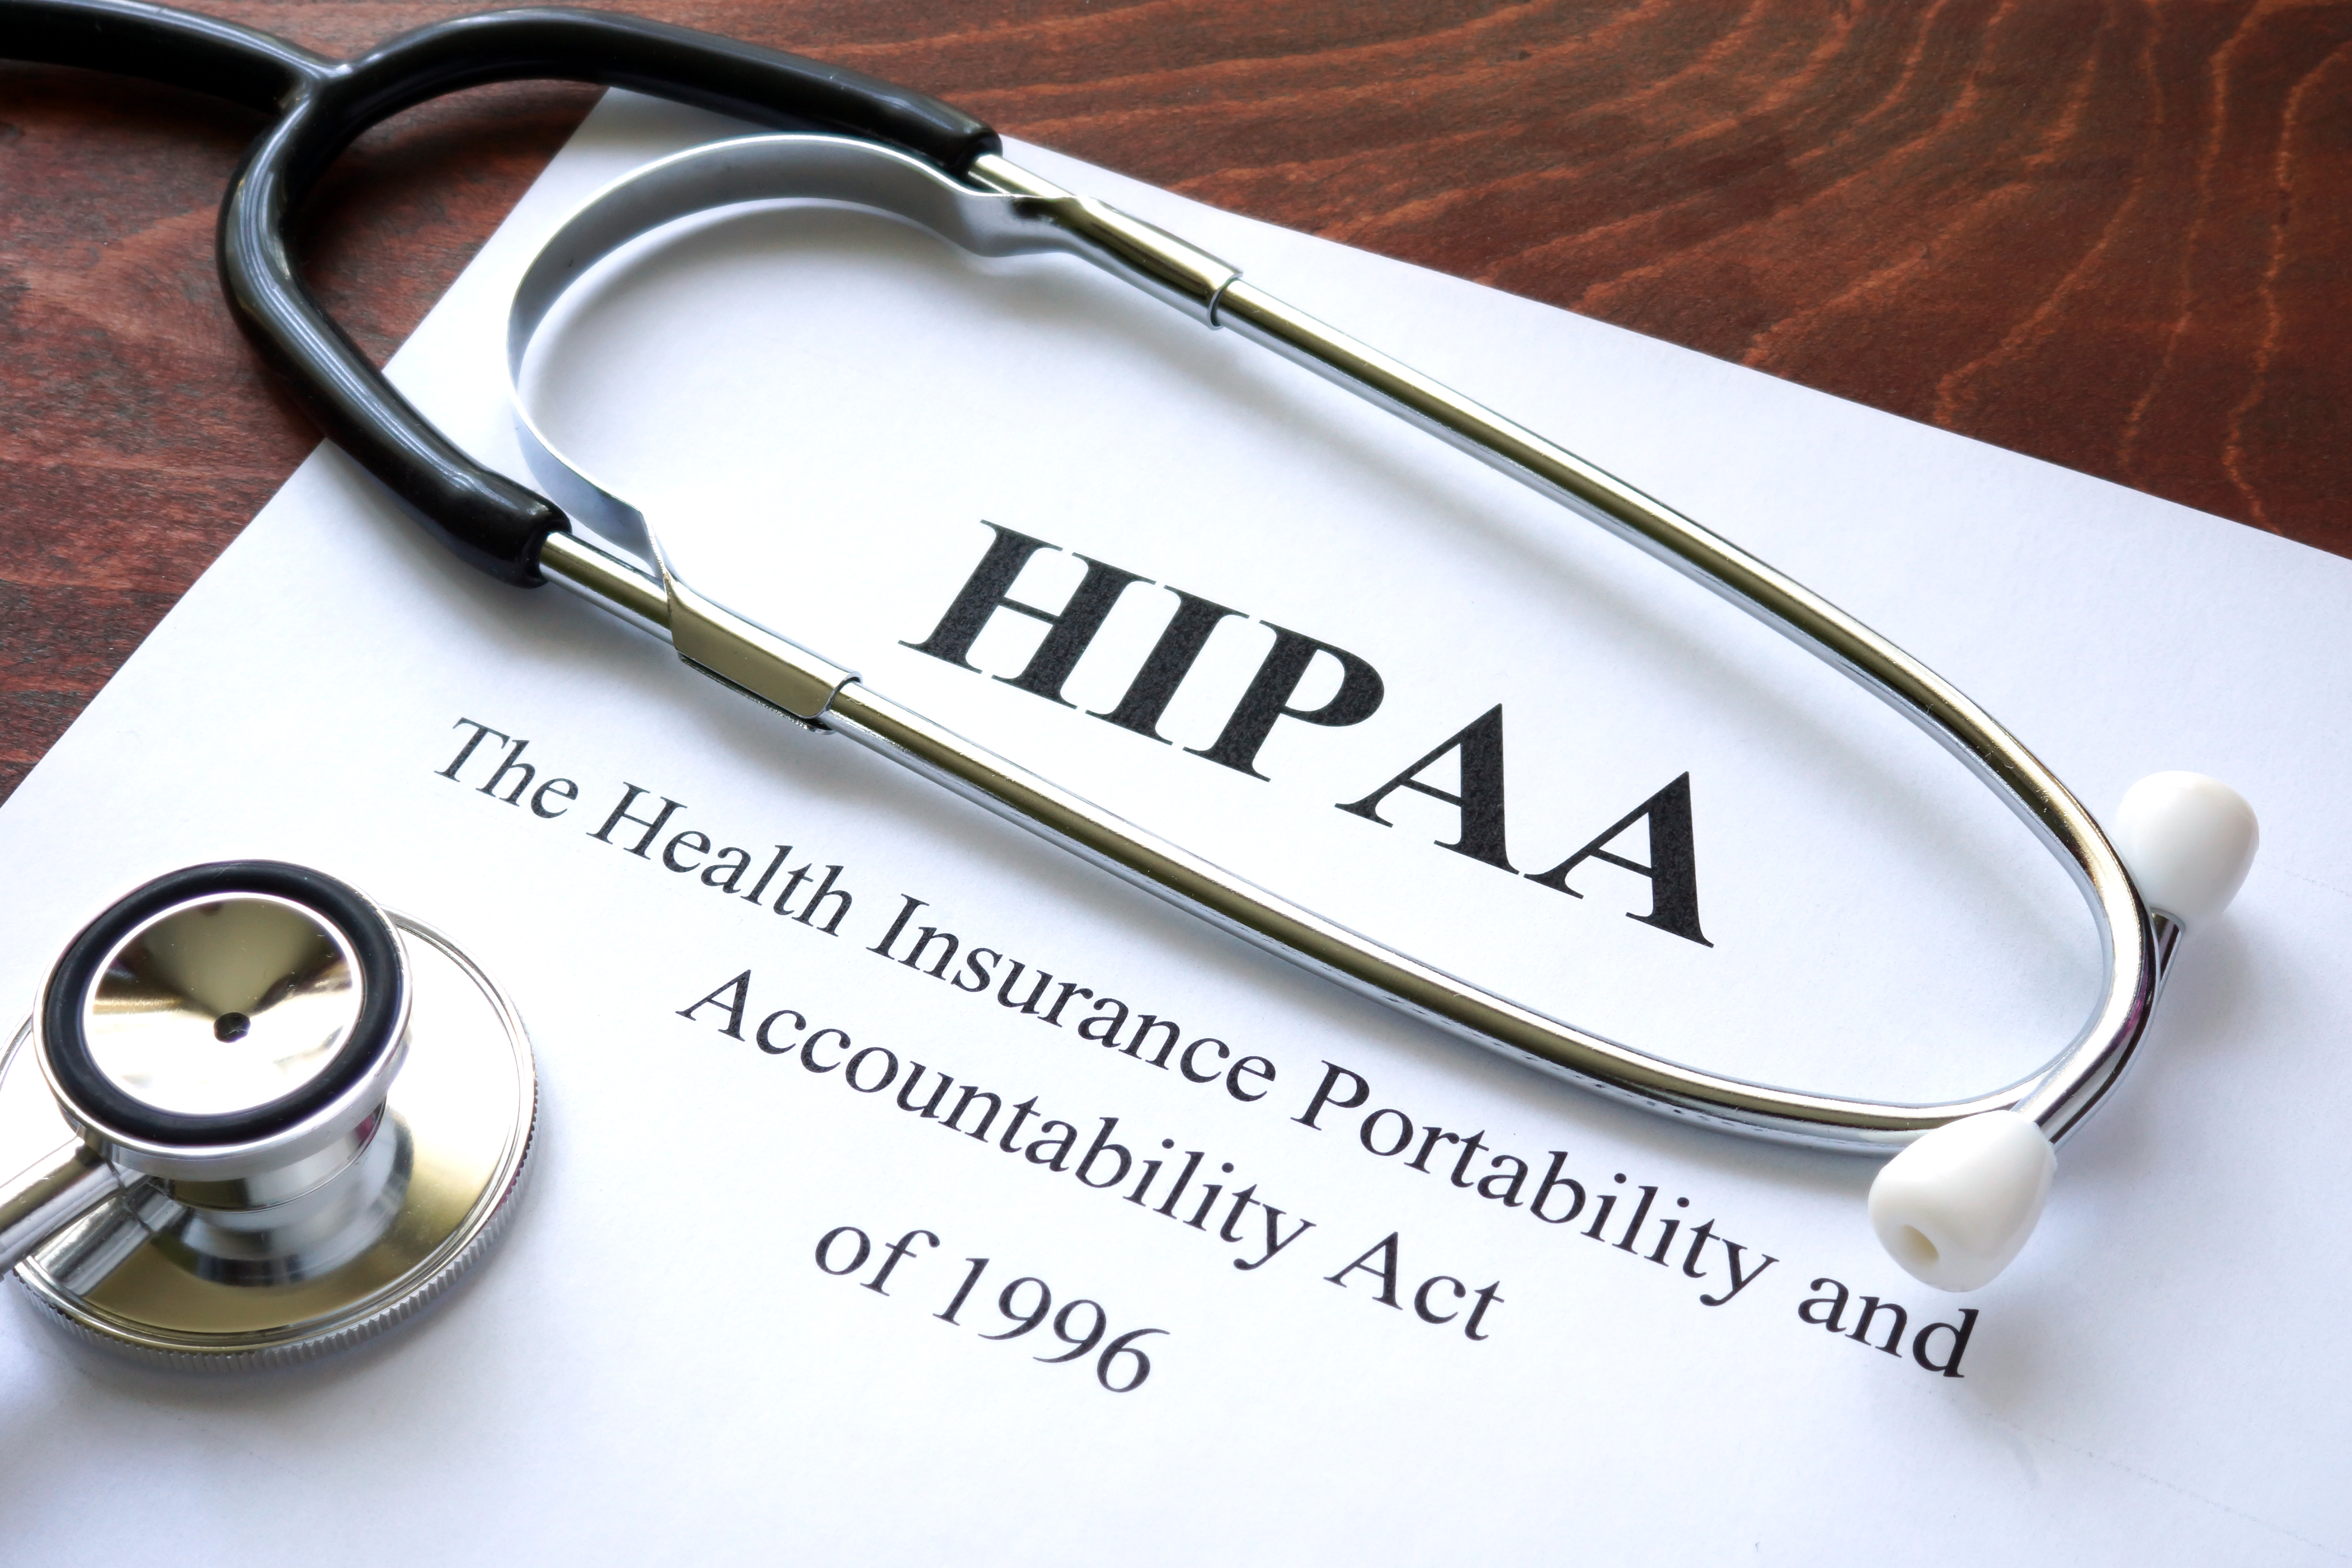 Health Insurance Portability and Accountability Act of 1996